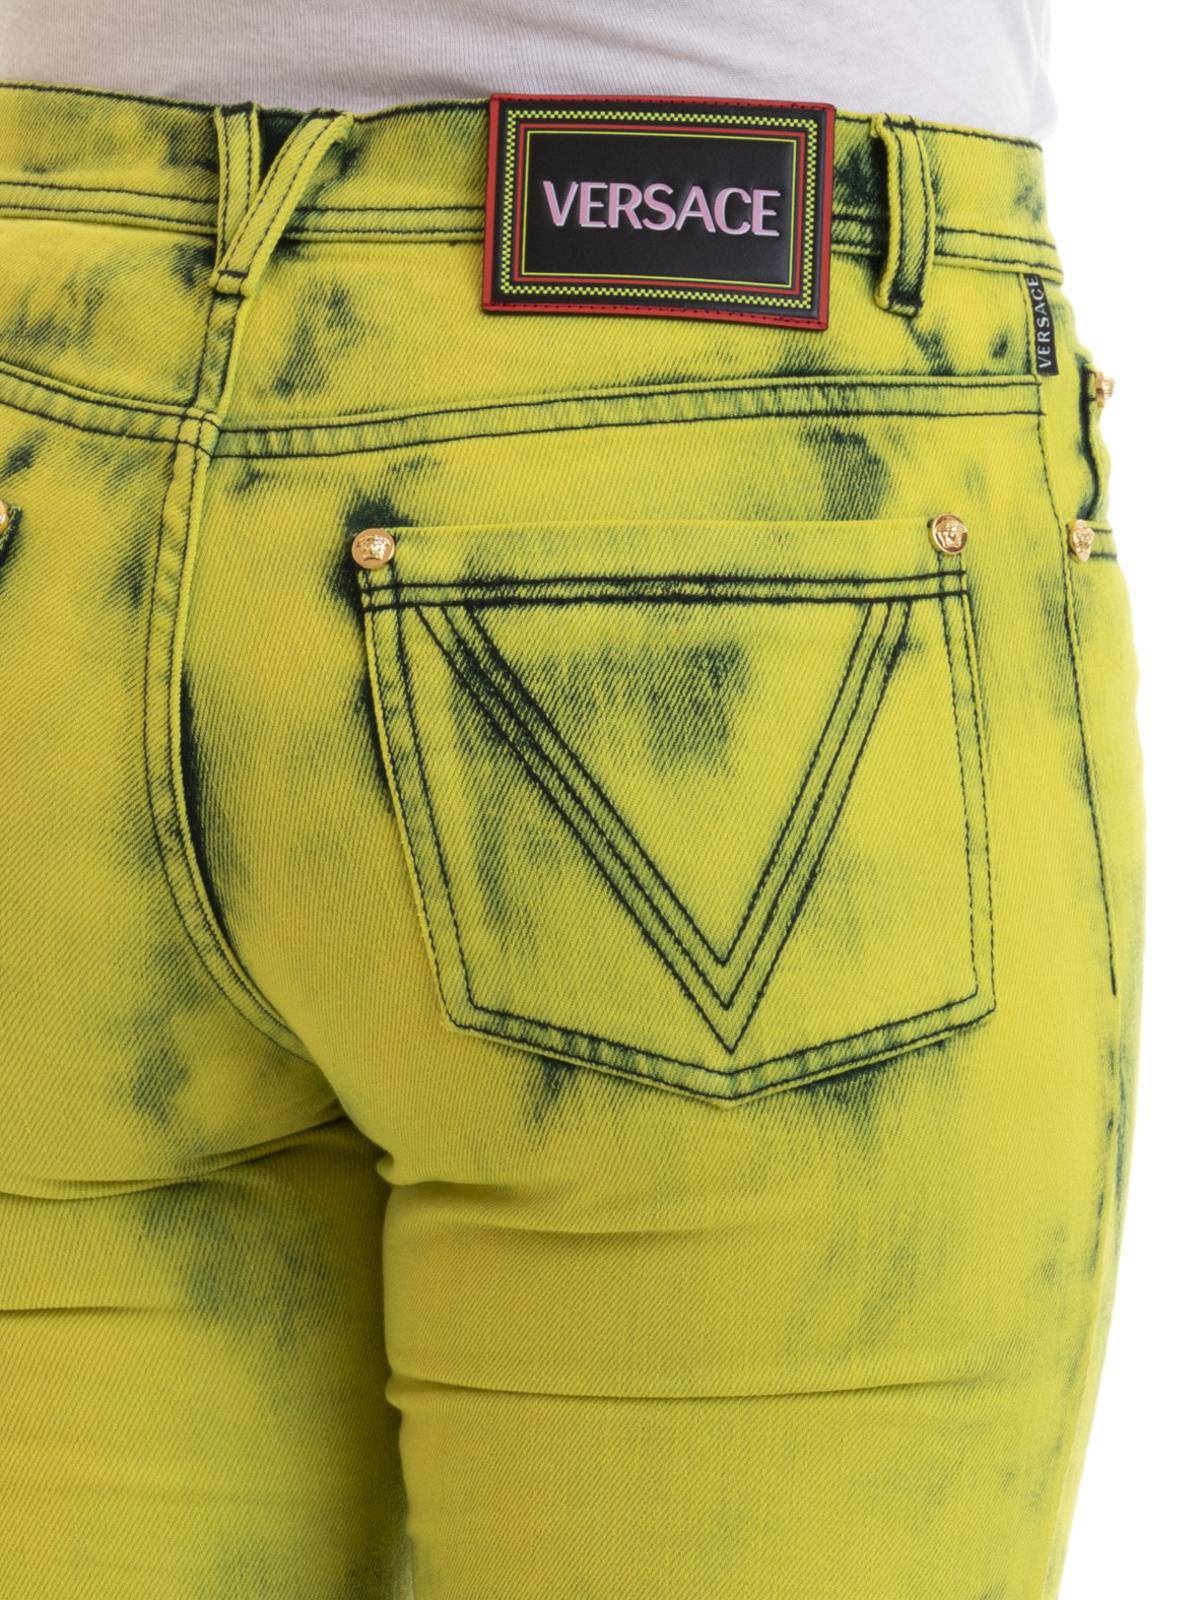 Versace Yellow Acid Wash Denim Skinny Jeans with Logo Label Size 29 For Sale 1